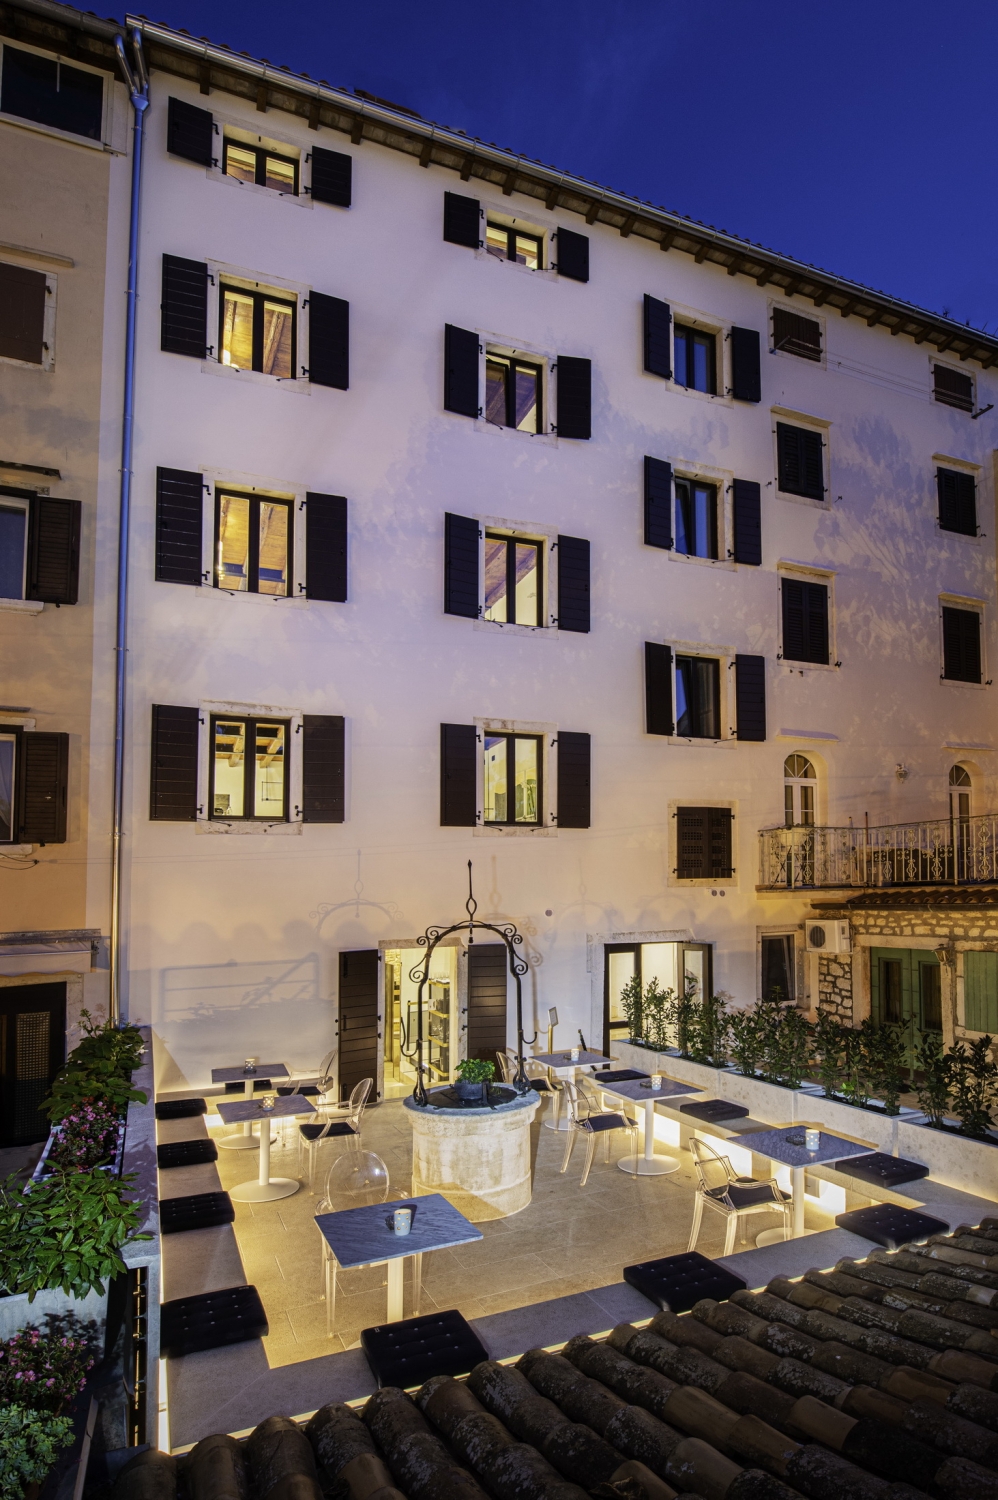 Romantic open terrace to enjoy long summer evenings with local food, wine and a light sea breeze